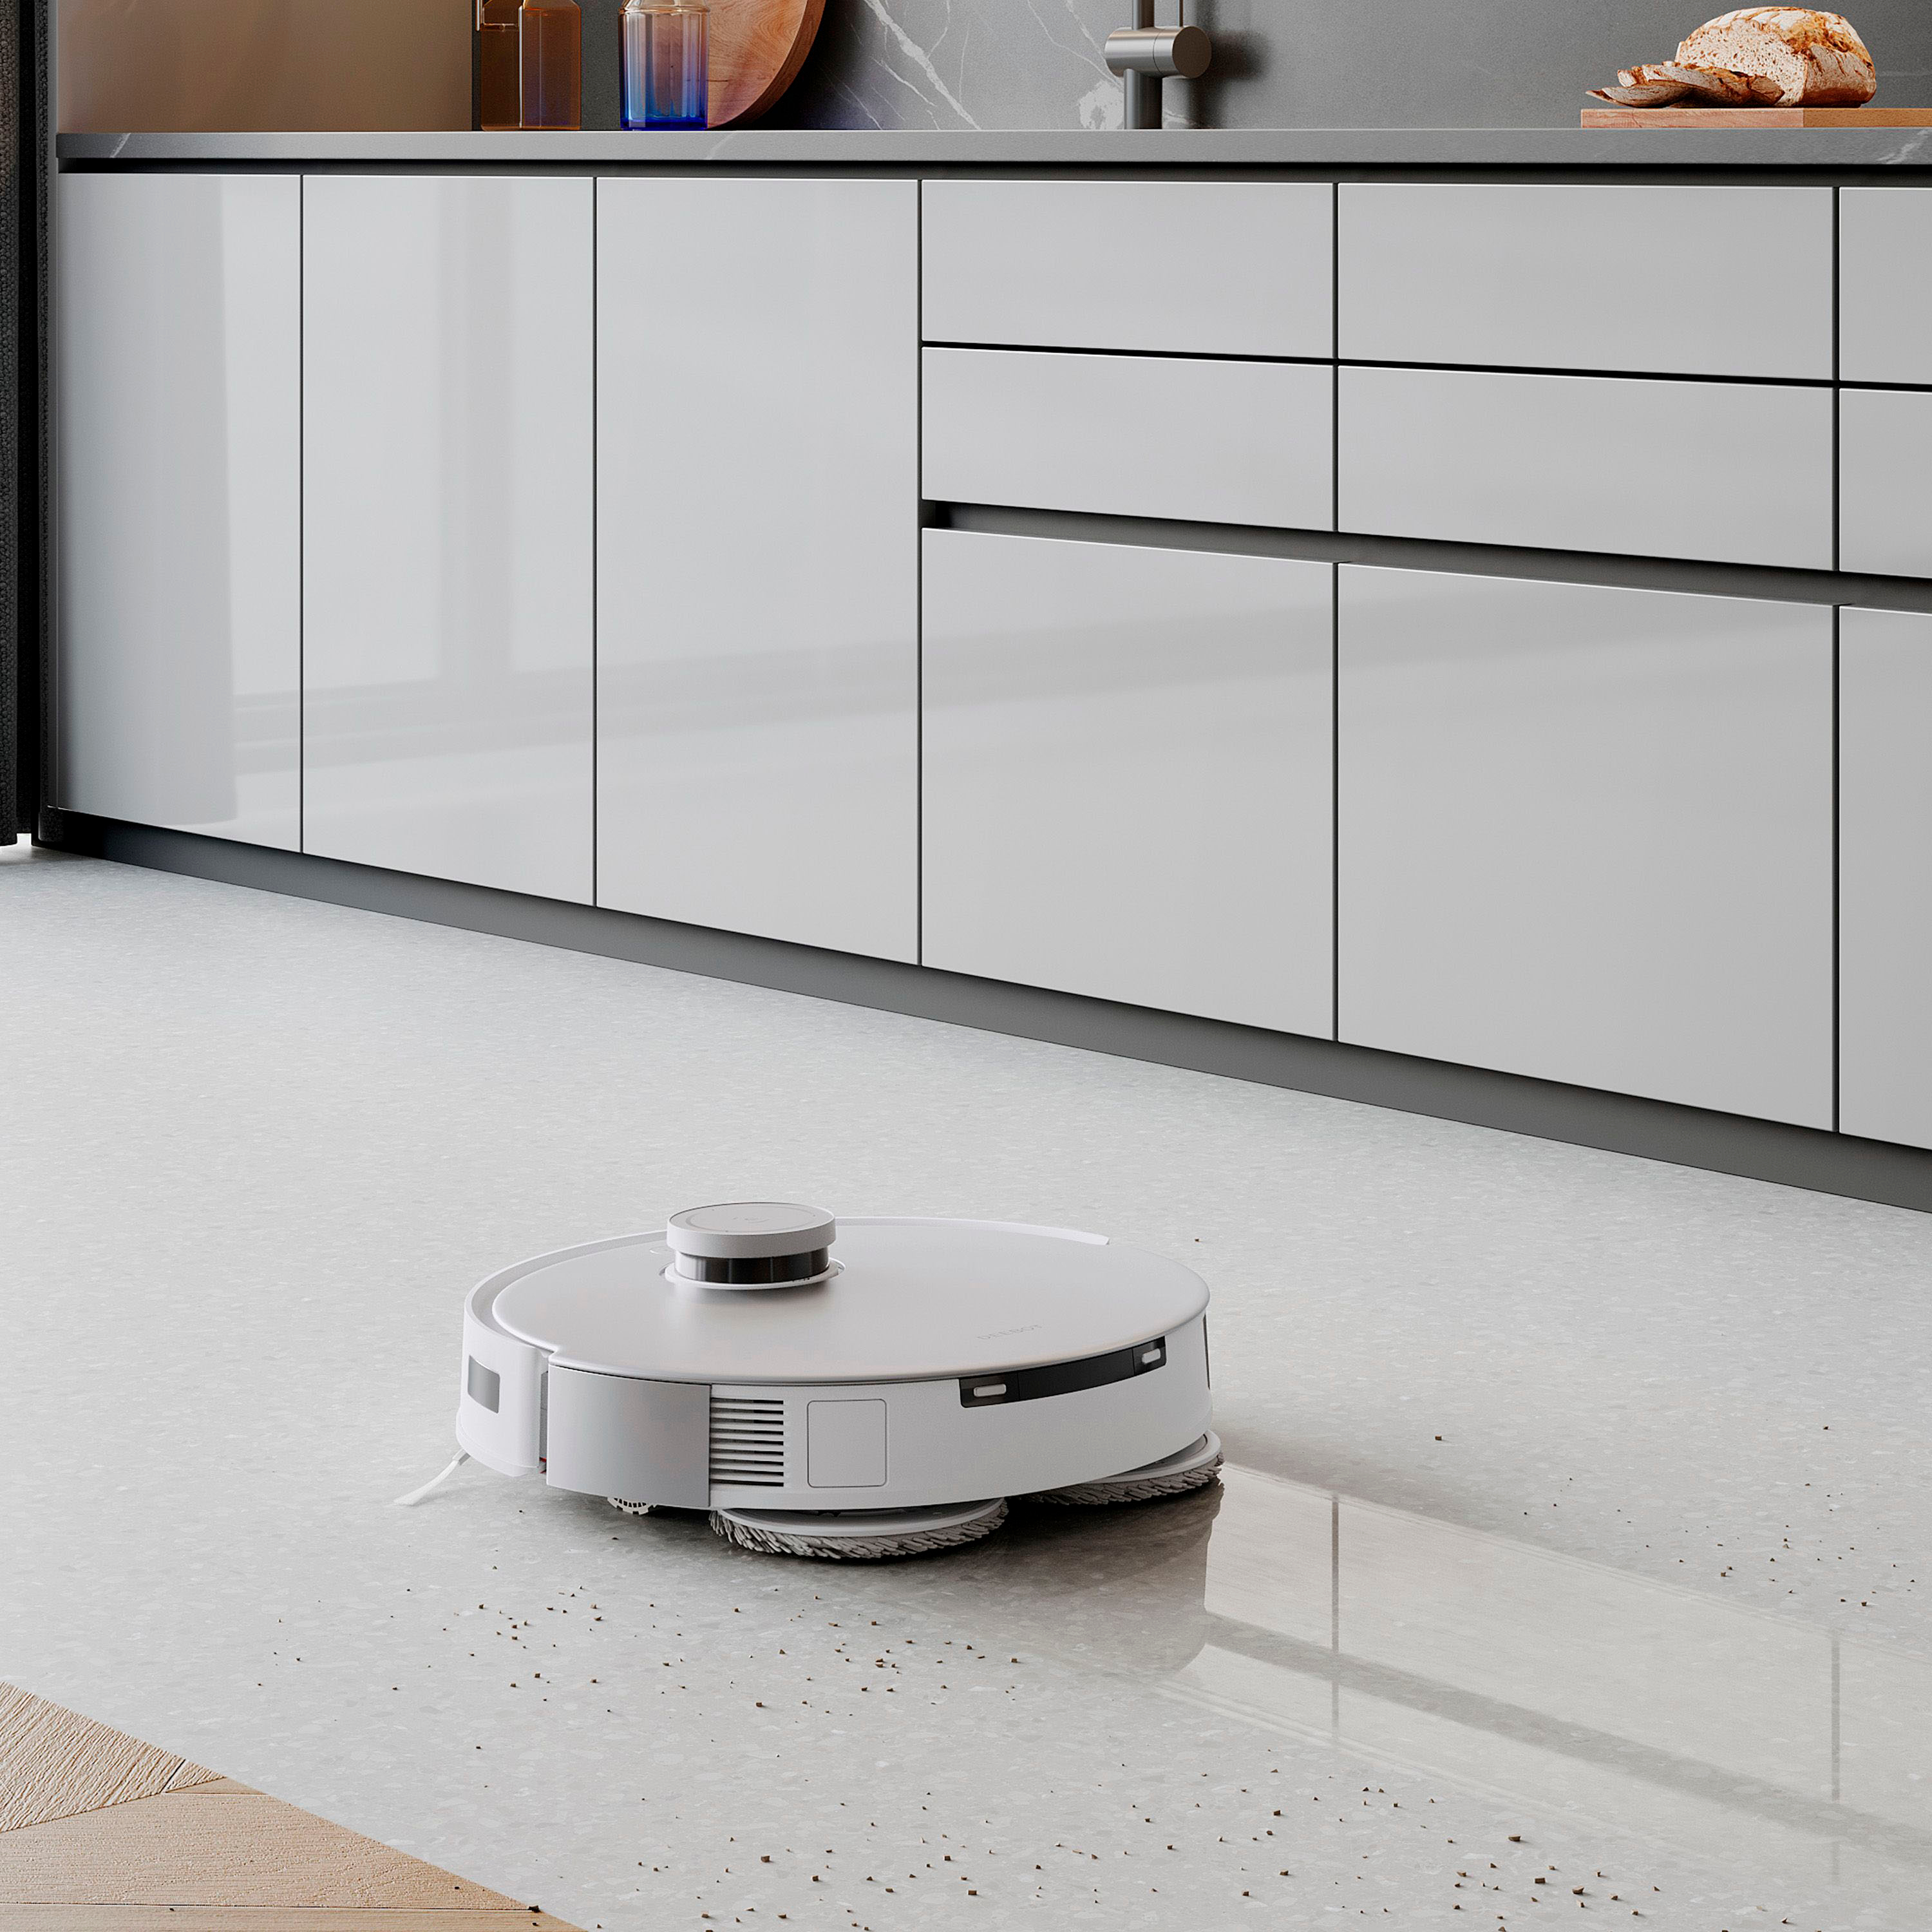 Station Robot Connected - Robotics Washing with Self Wi-Fi & Buy Mop OZMOT20M T20 DEEBOT OMNI Empty WHITE ECOVACS Best Vacuum Auto